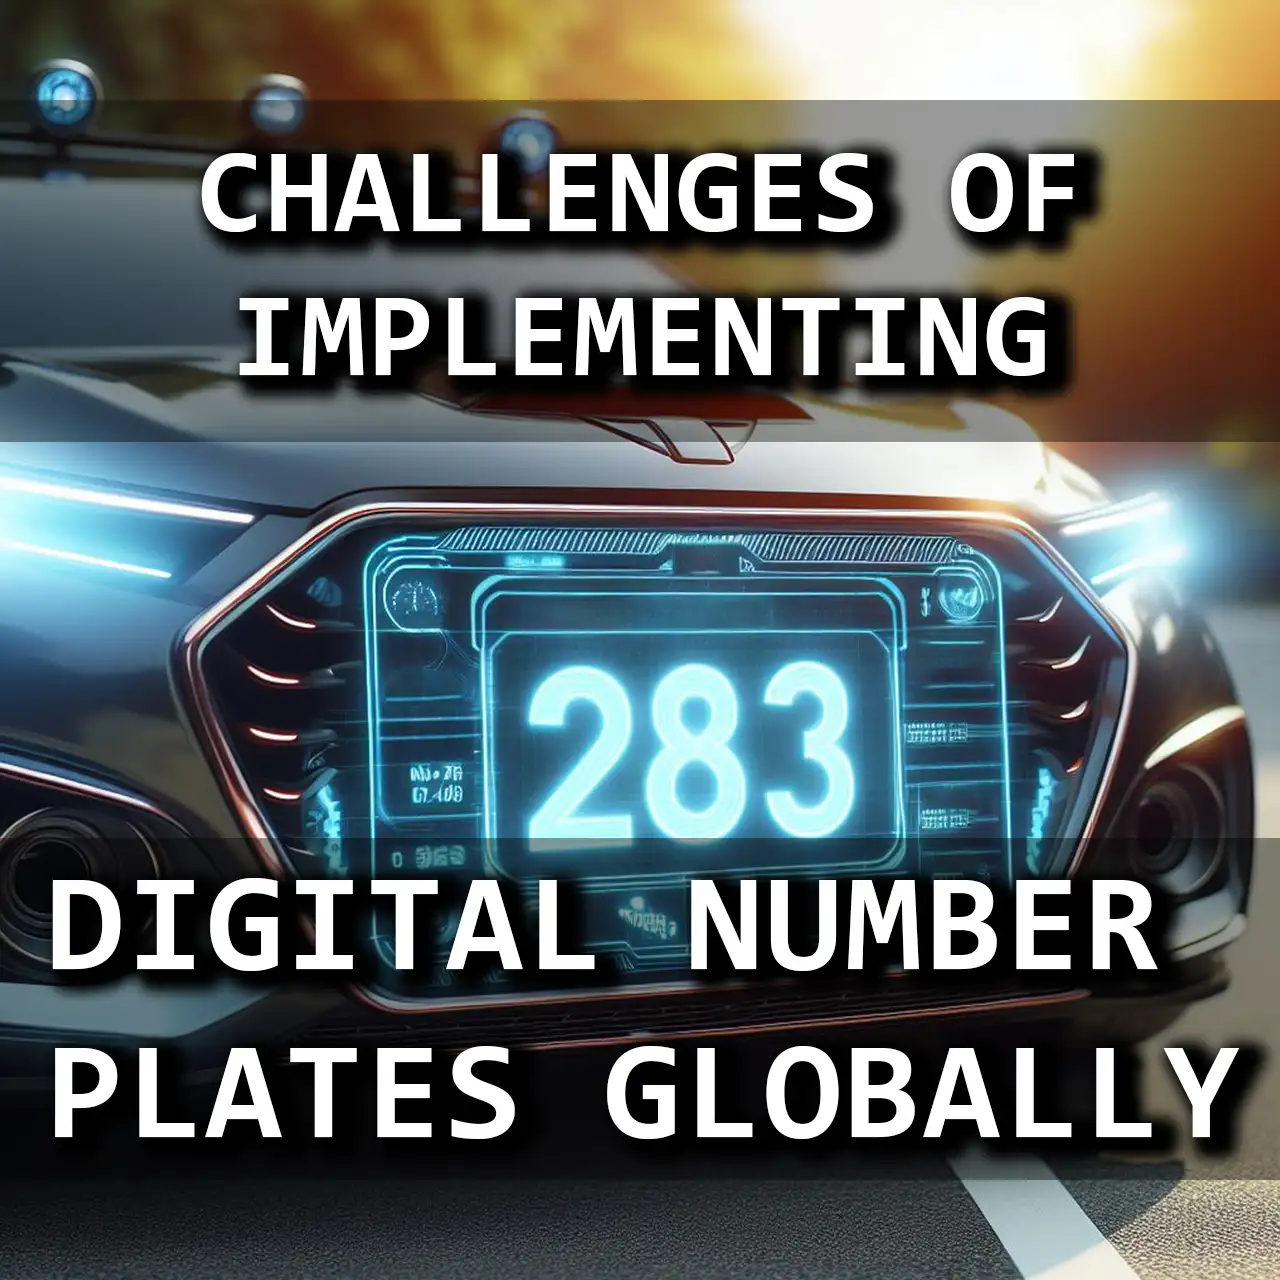 The Challenges of Implementing Digital Number Plates Globally